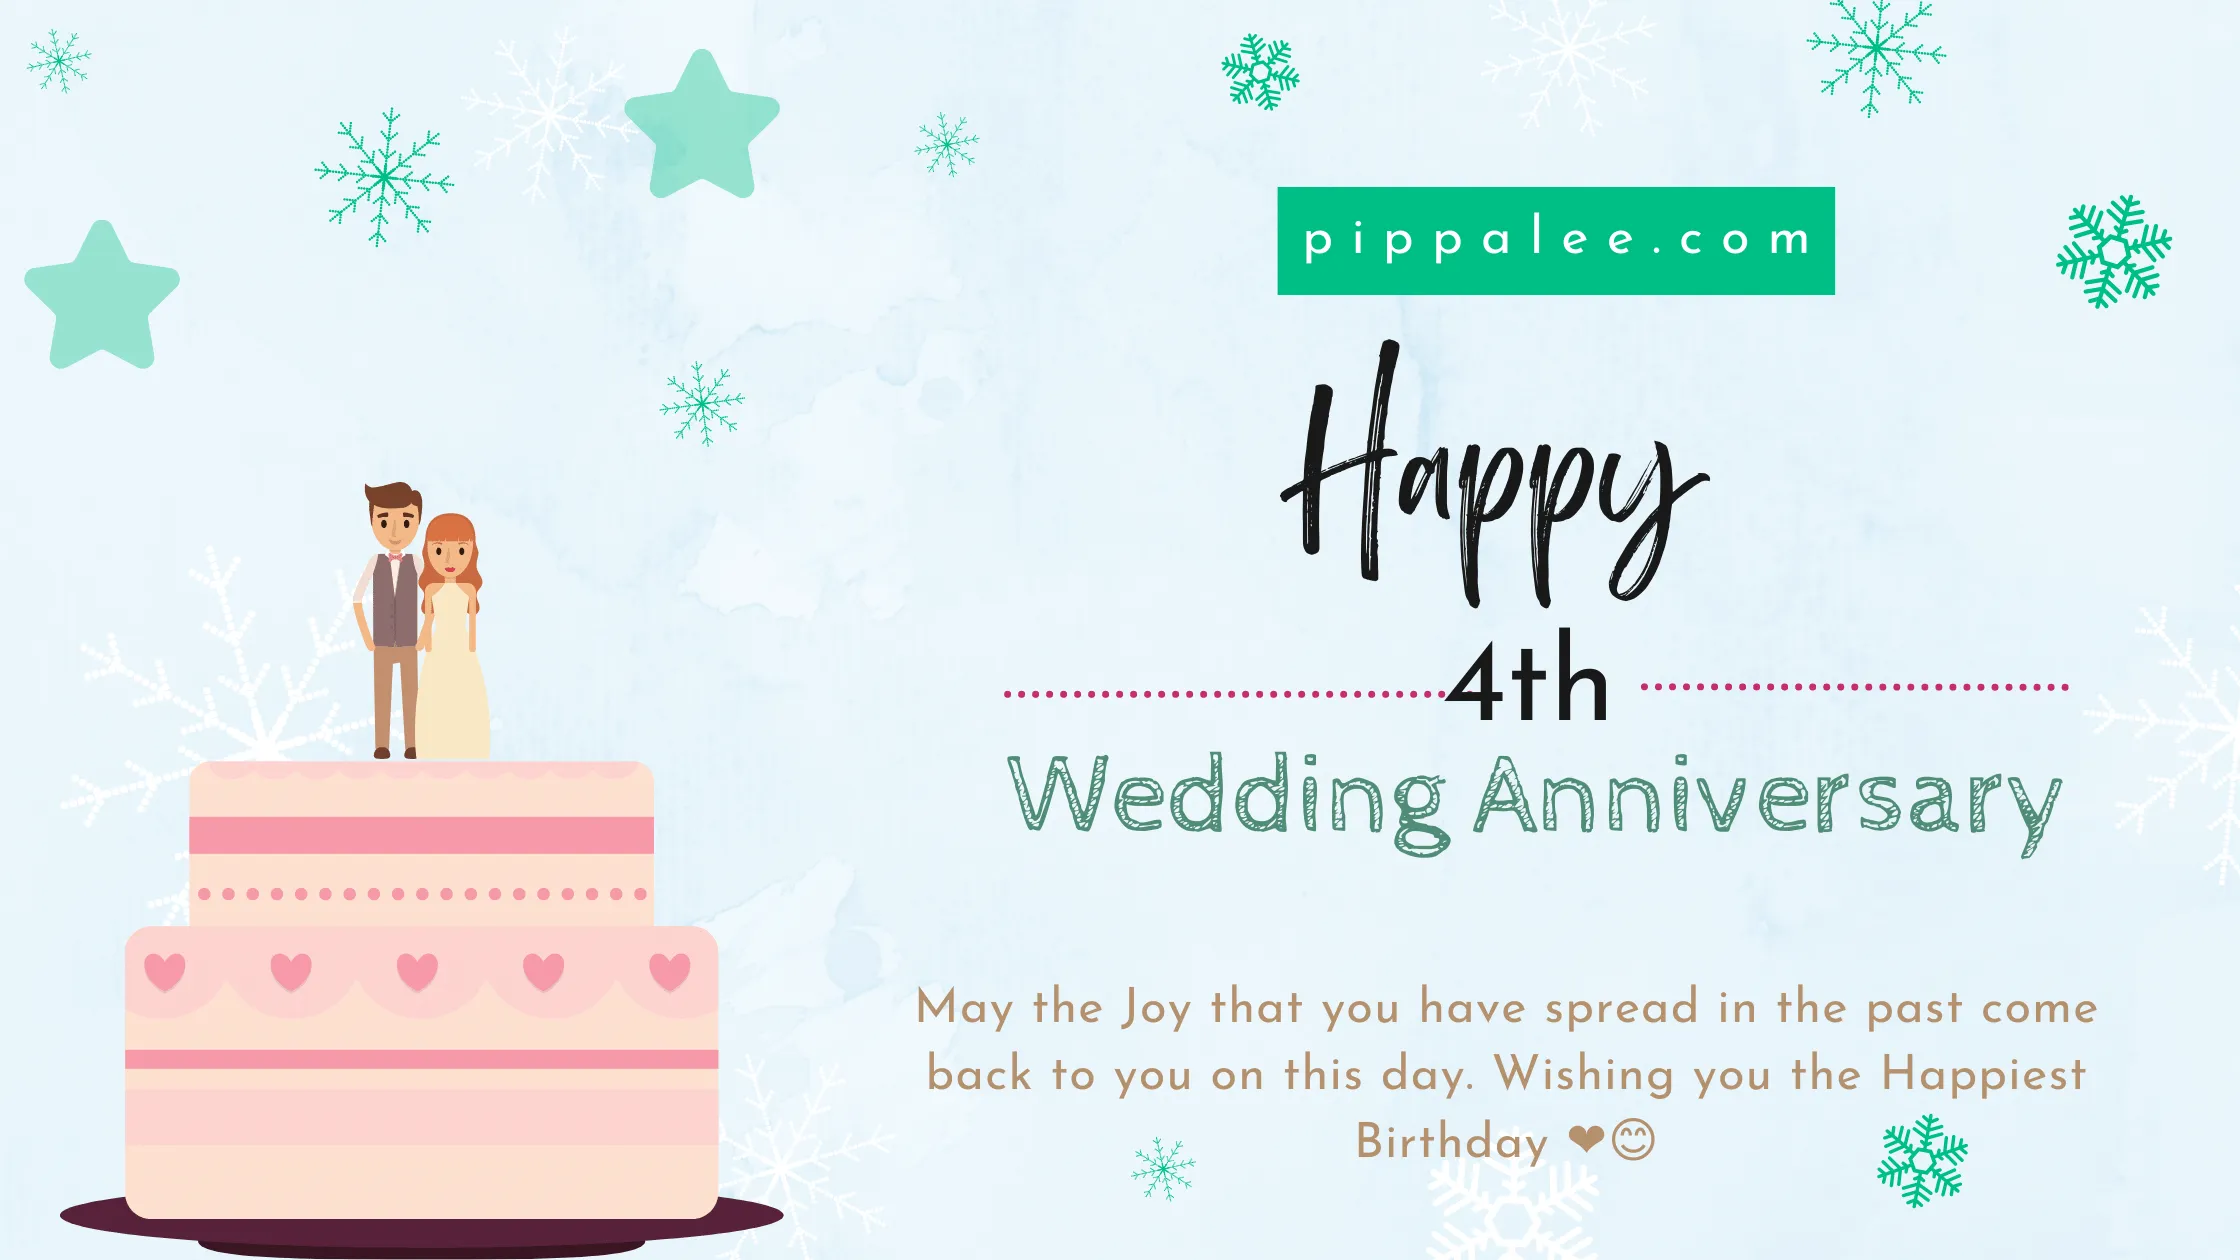 4th Wedding Anniversary - Wishes & Messages